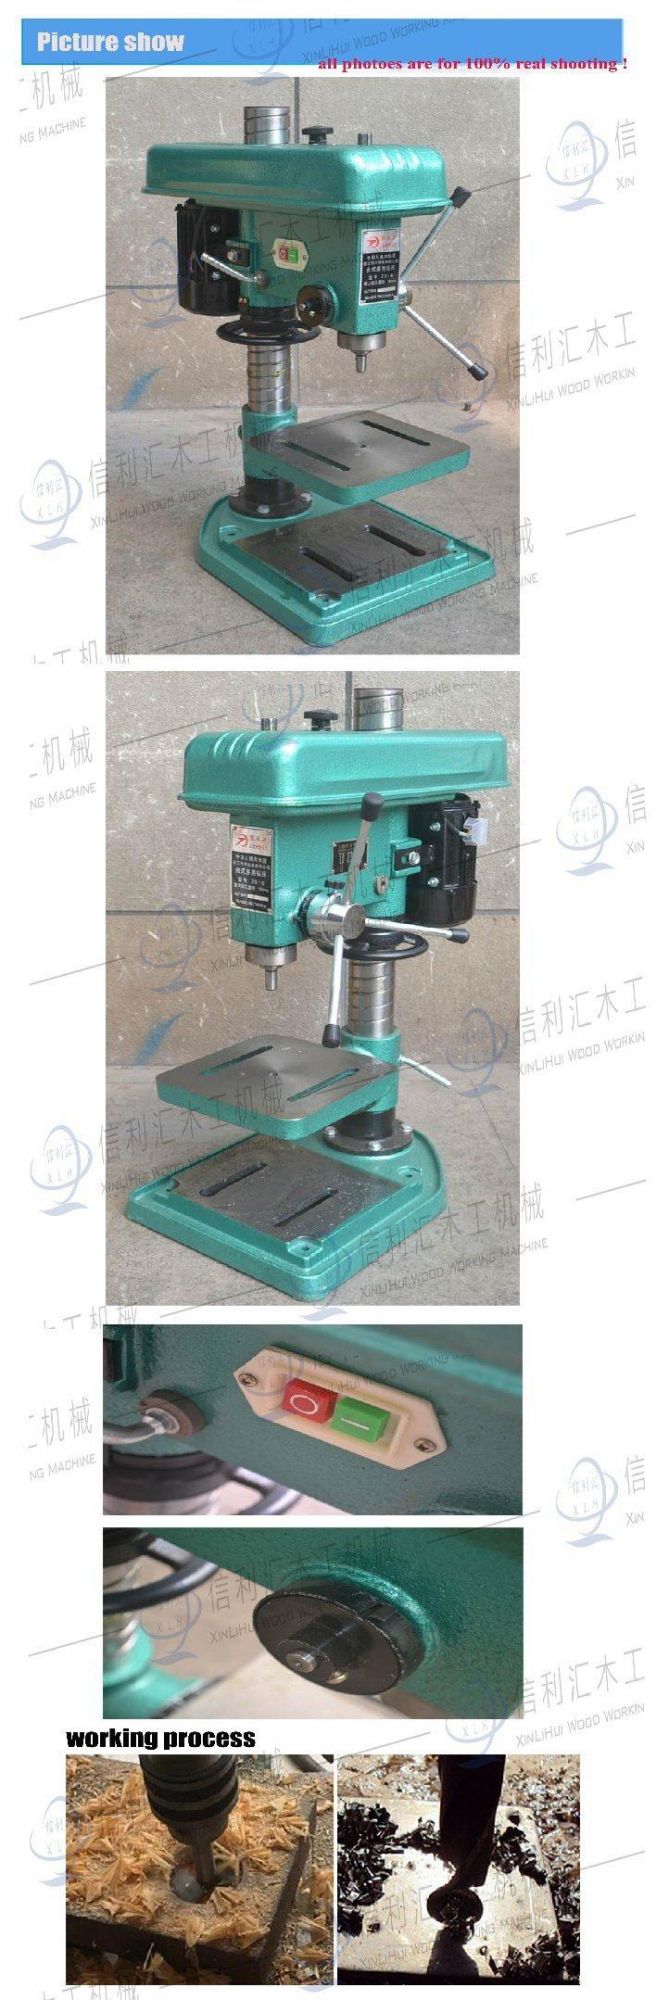 1HP Spindle Travel Radial Bench Top Drill Press 110V 750W, Mini Milling Drilling Machine with Gear Drive Precision Vertical Taladro Pedestal, Taladro Columna